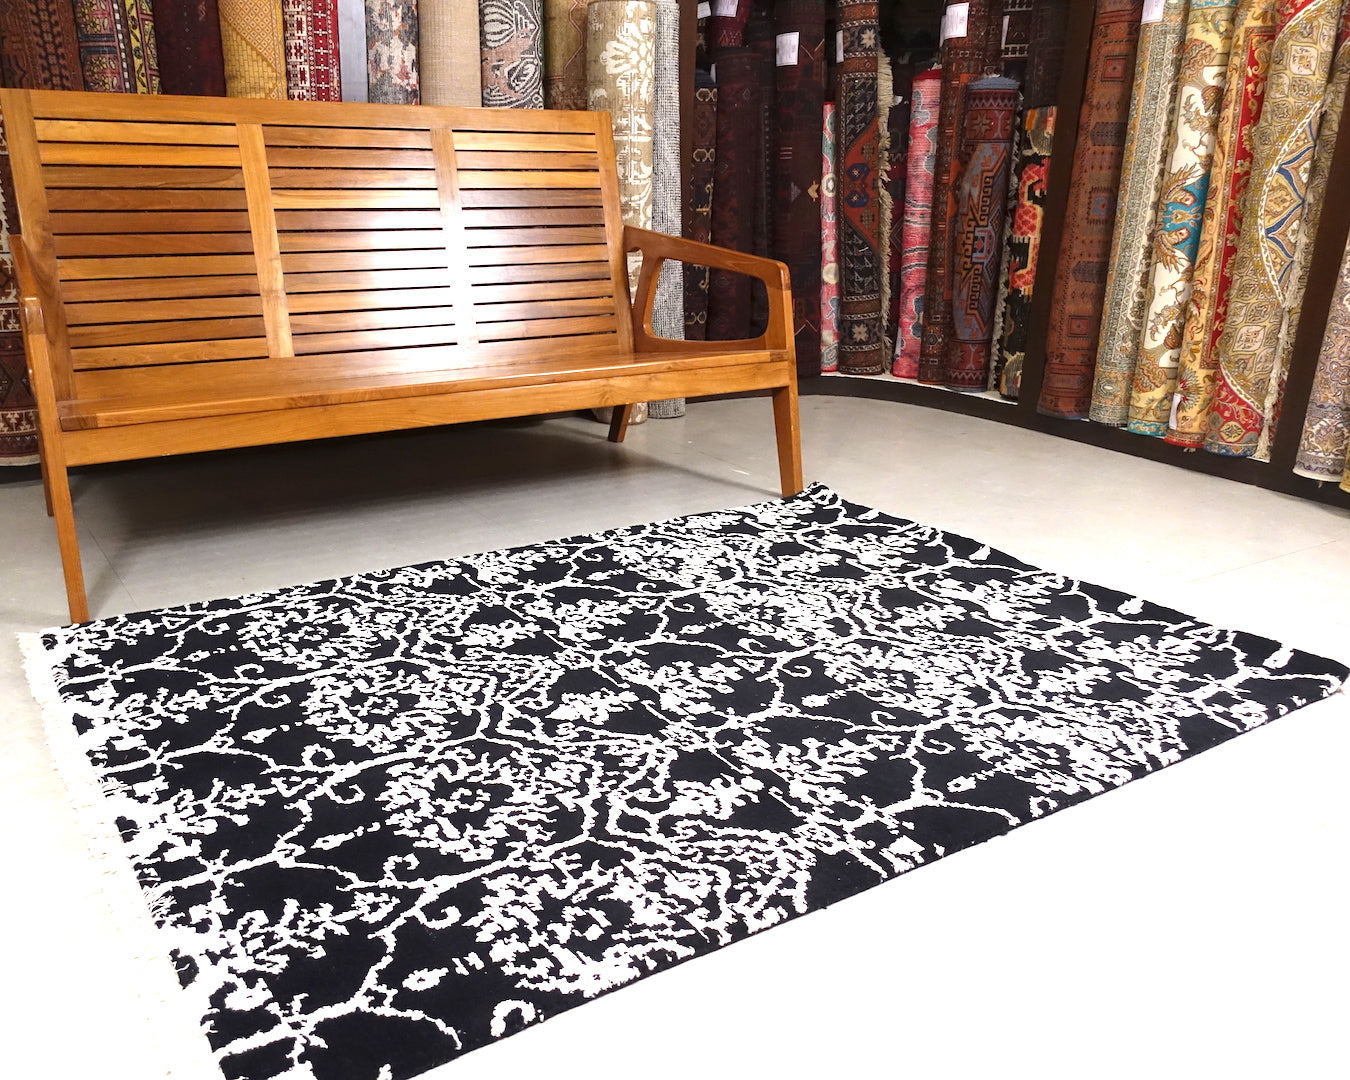 A 4 by 6 feet rug in black and white floral pattern.